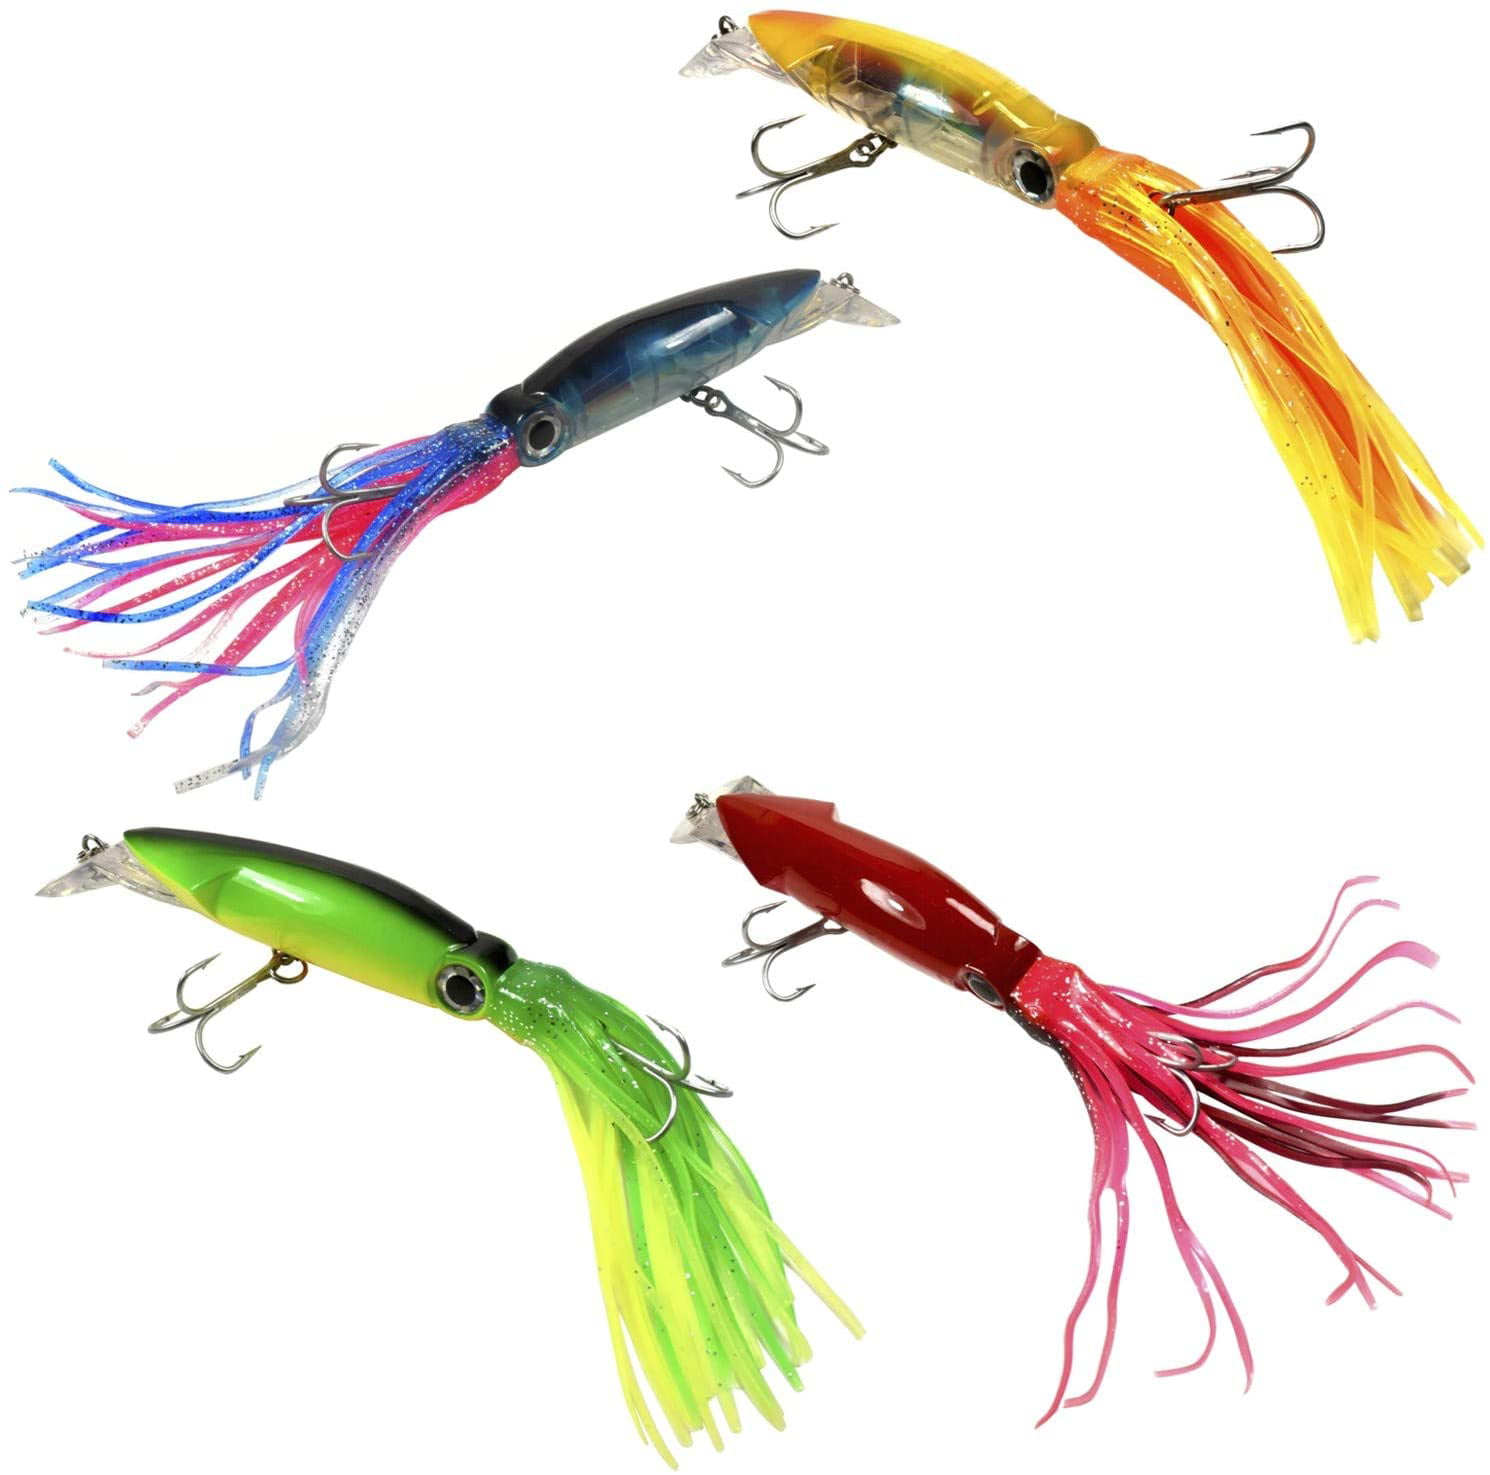 HQRP Fishing Lures Freshwater Lakes River Saltwater Sea Ocean Fish Baits  Tackle for Bass Bluegill Bream 